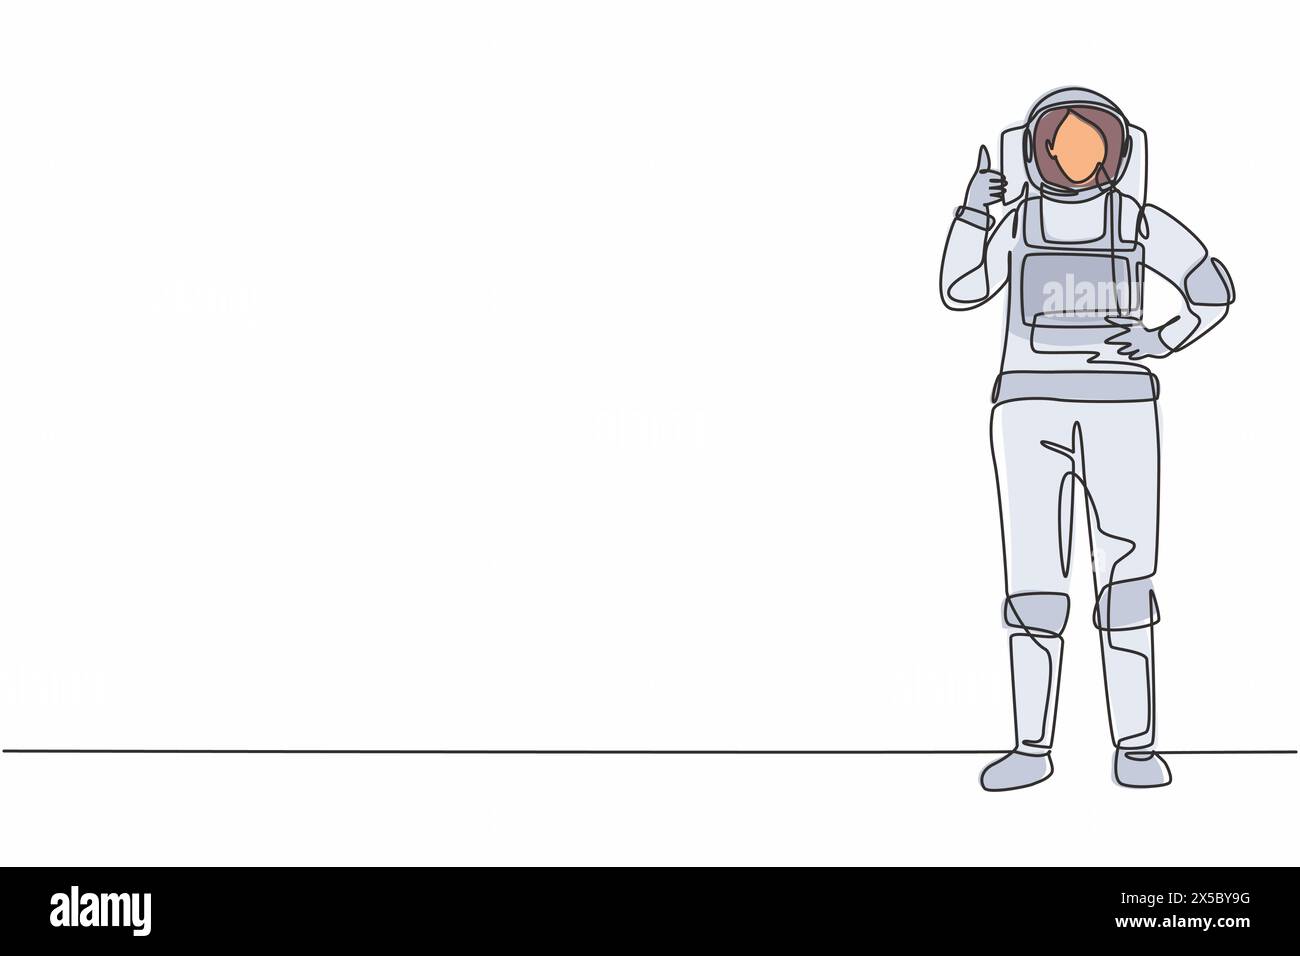 Single continuous line drawing female astronaut stands with thumbs-up gesture wearing space suit exploring earth, moon, other planets in the universe. Stock Vector